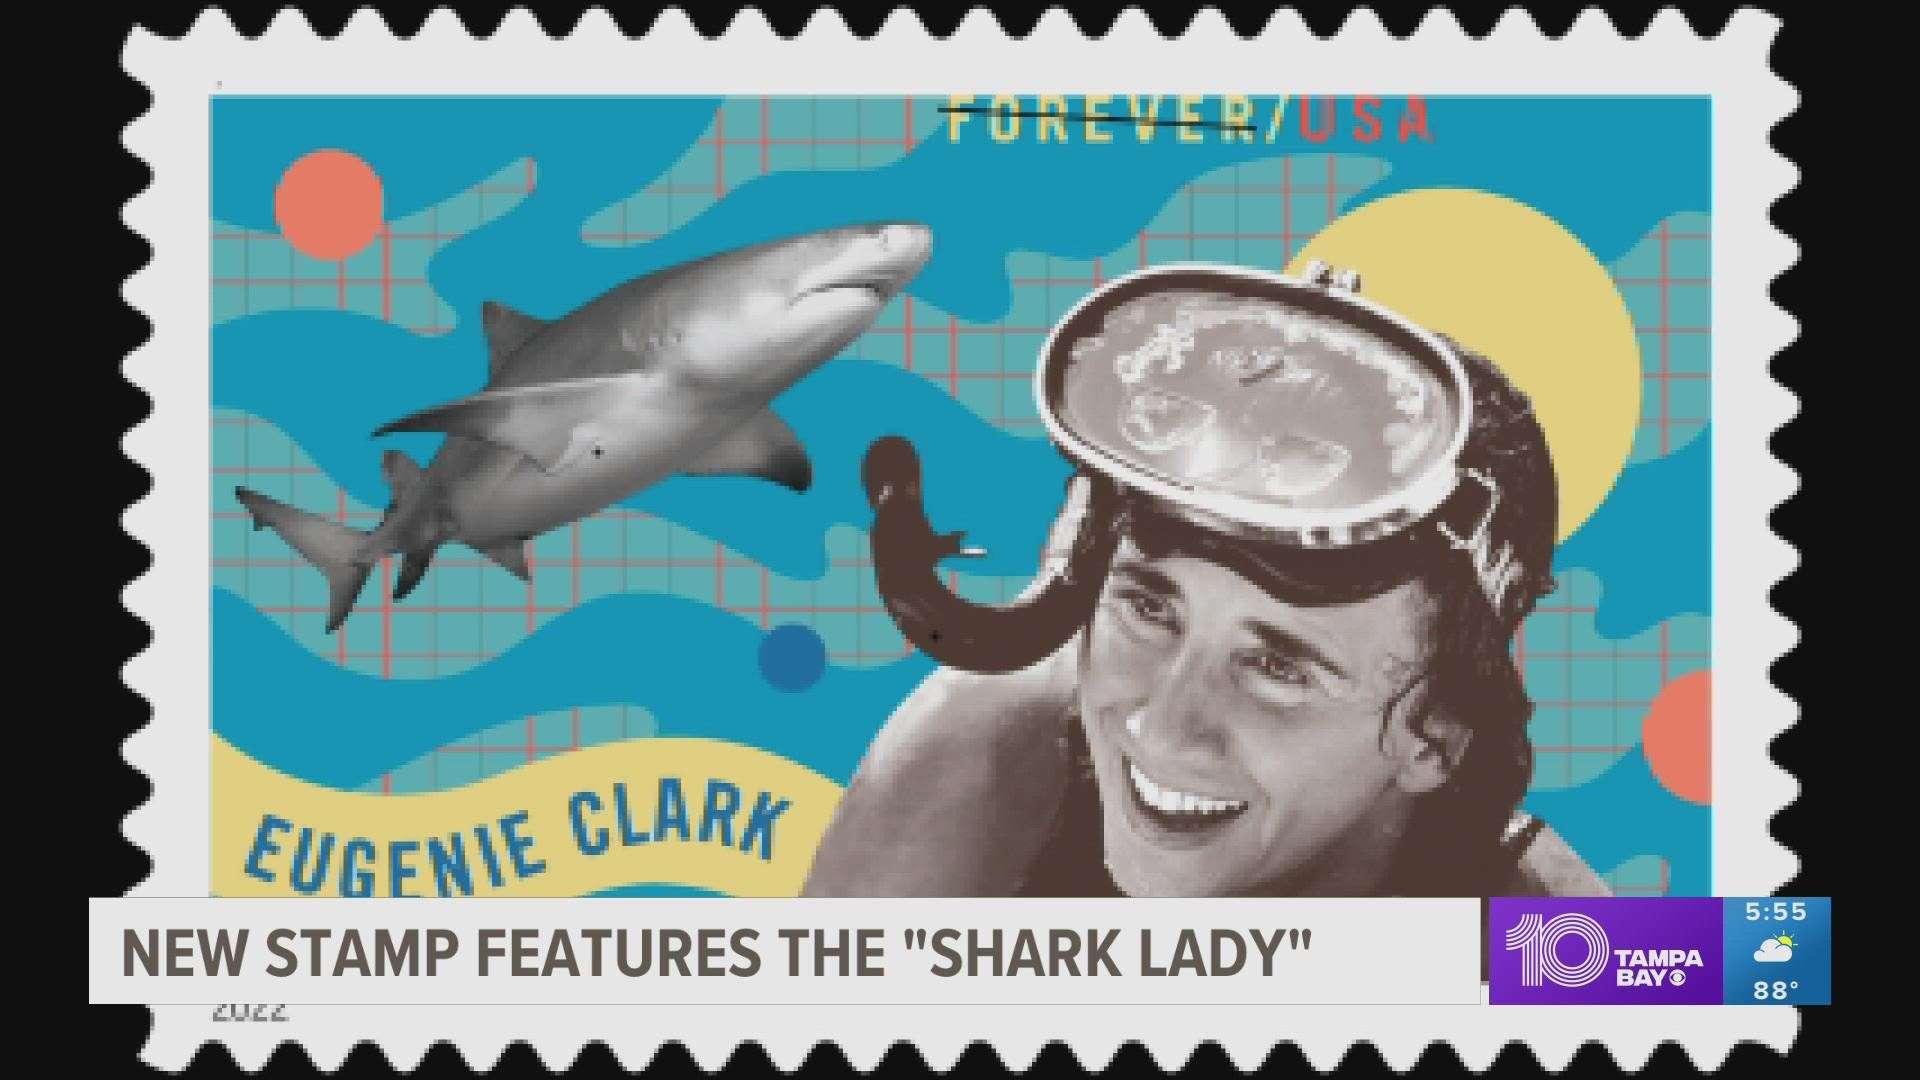 Throughout her life, Clark worked tirelessly to change public perception of sharks as well as preserve marine environments.